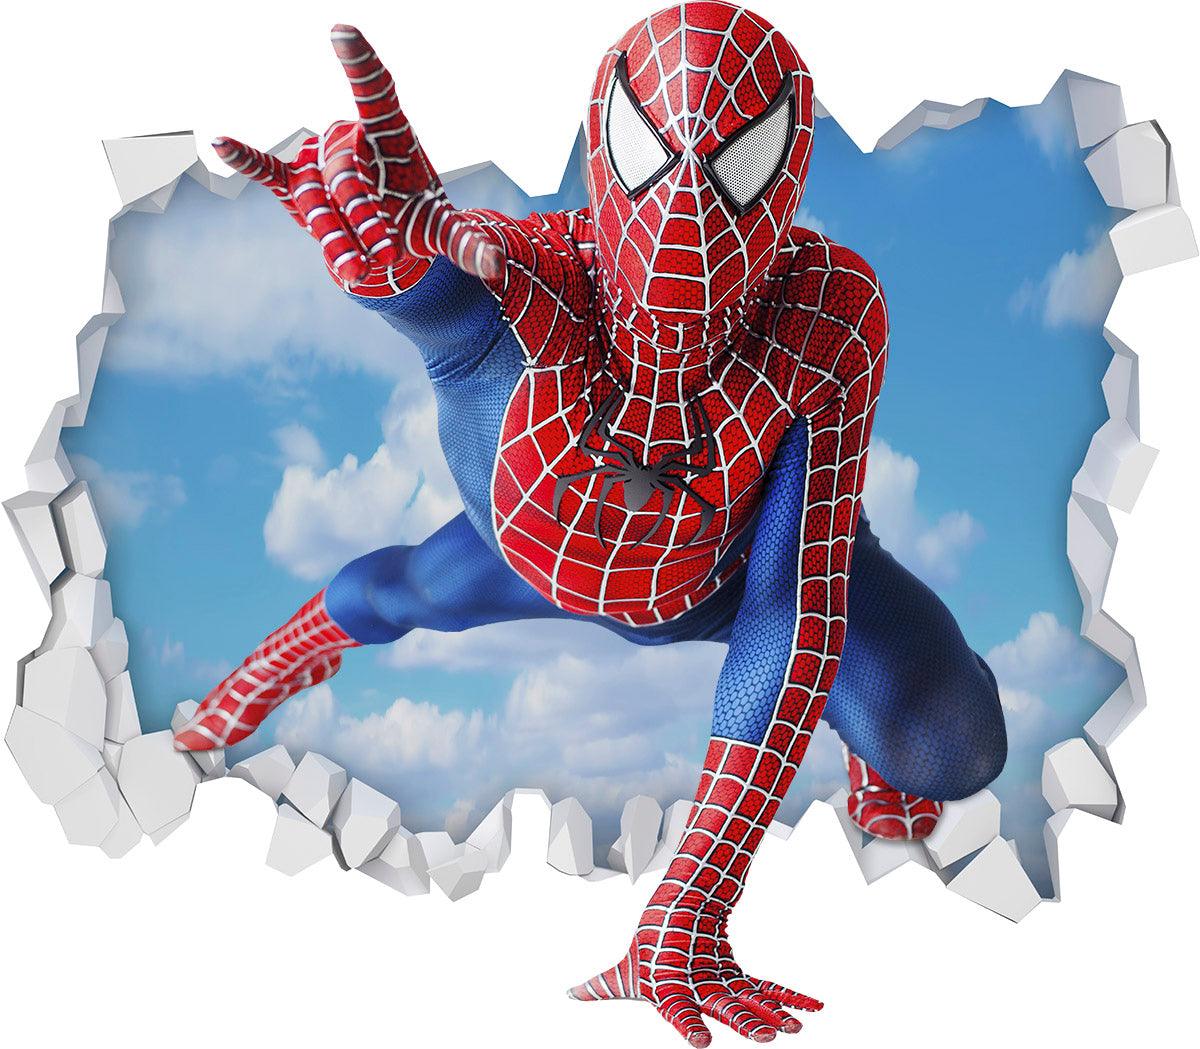 3D Spiderman breaking through Wall, Wall Decal Sticker, Removable 109